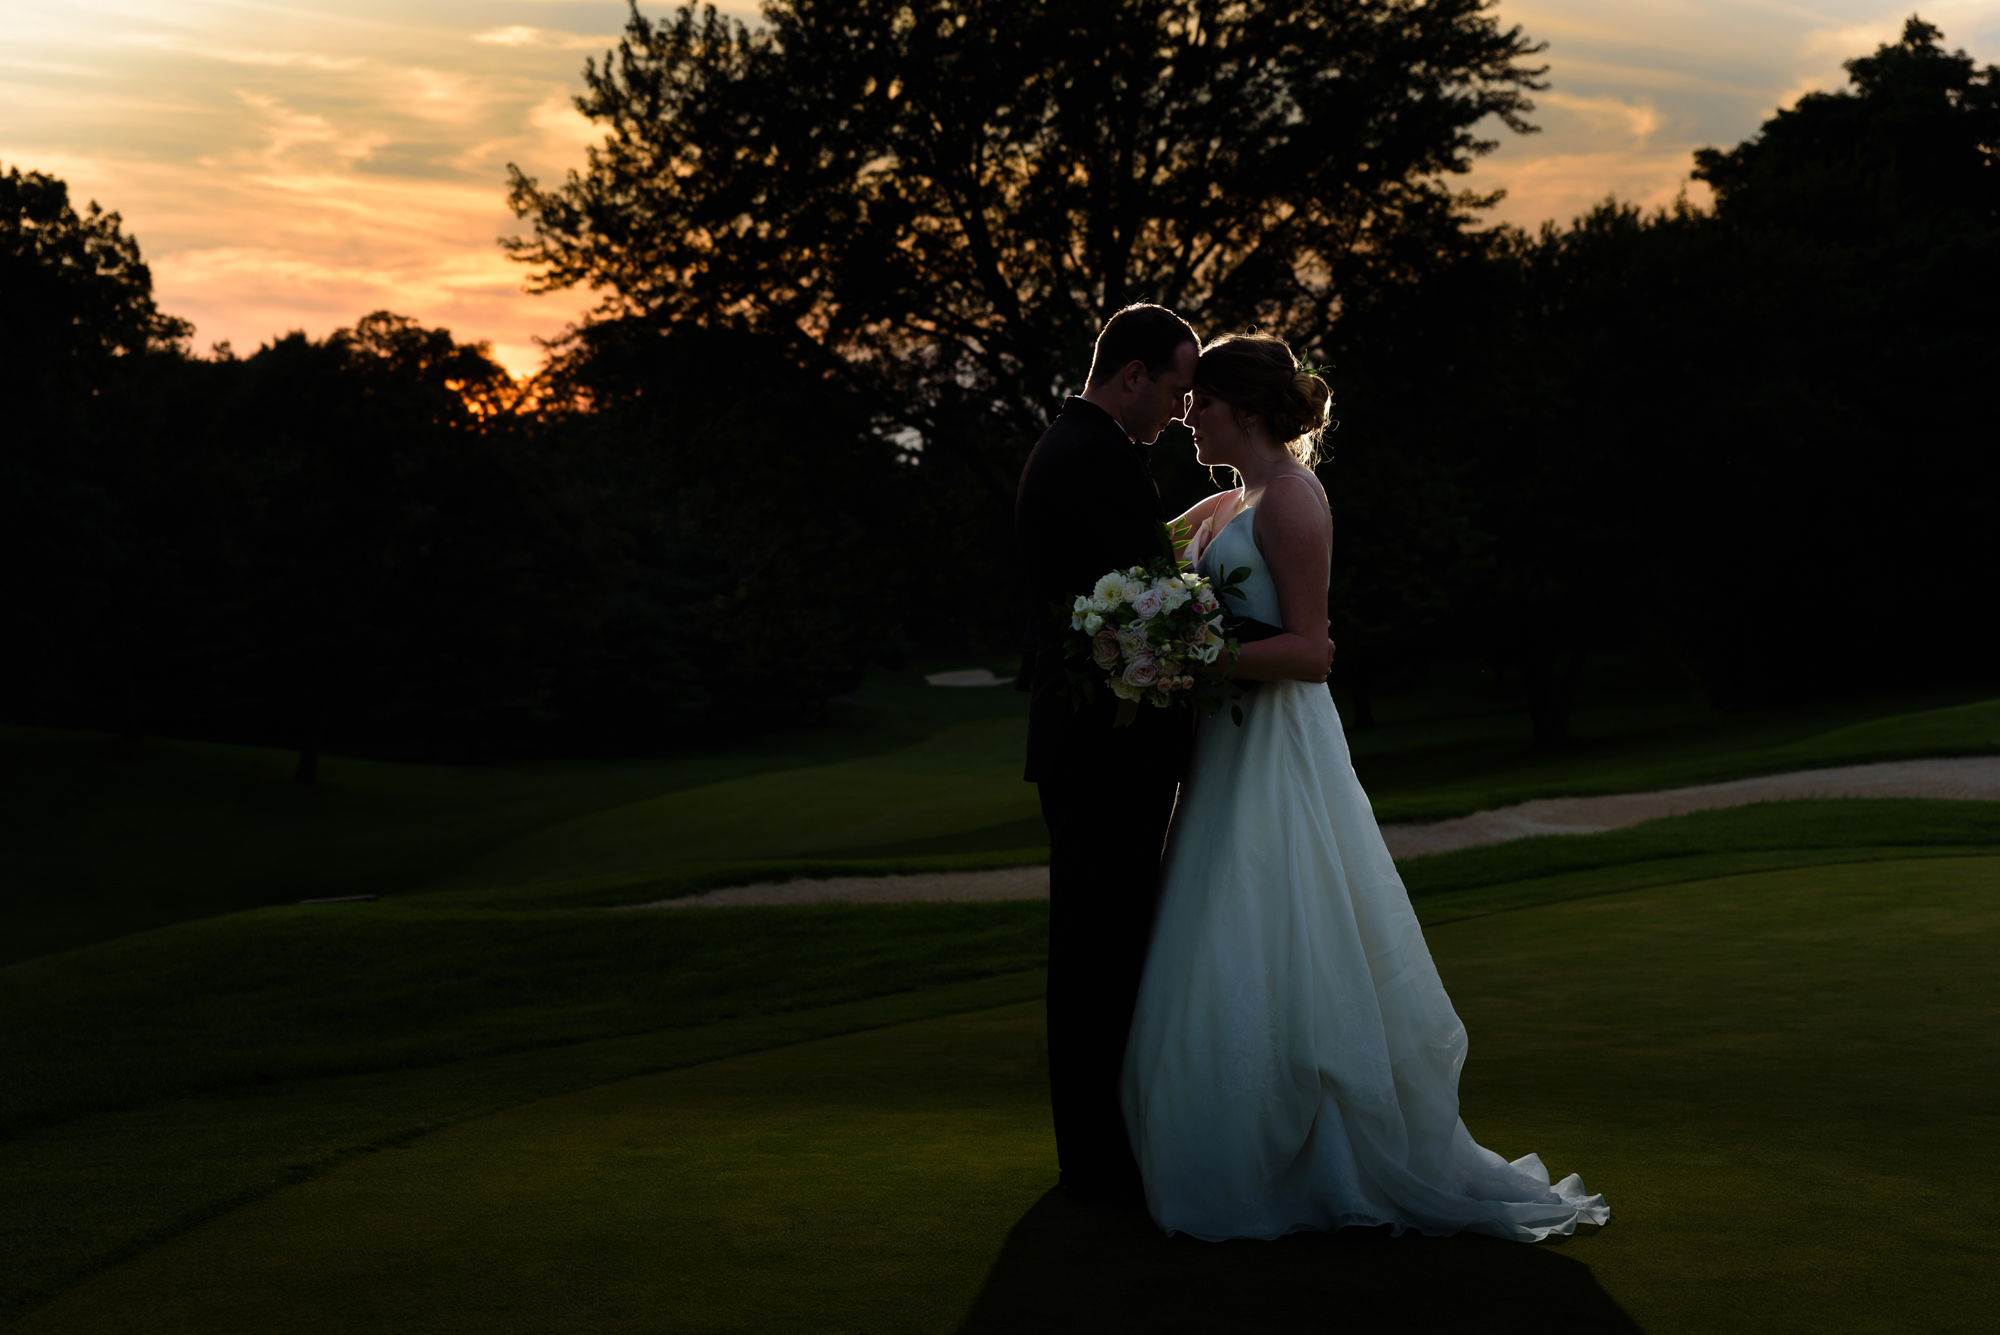 End of the Night sunset at a Wedding Reception at Morris Park Country Club